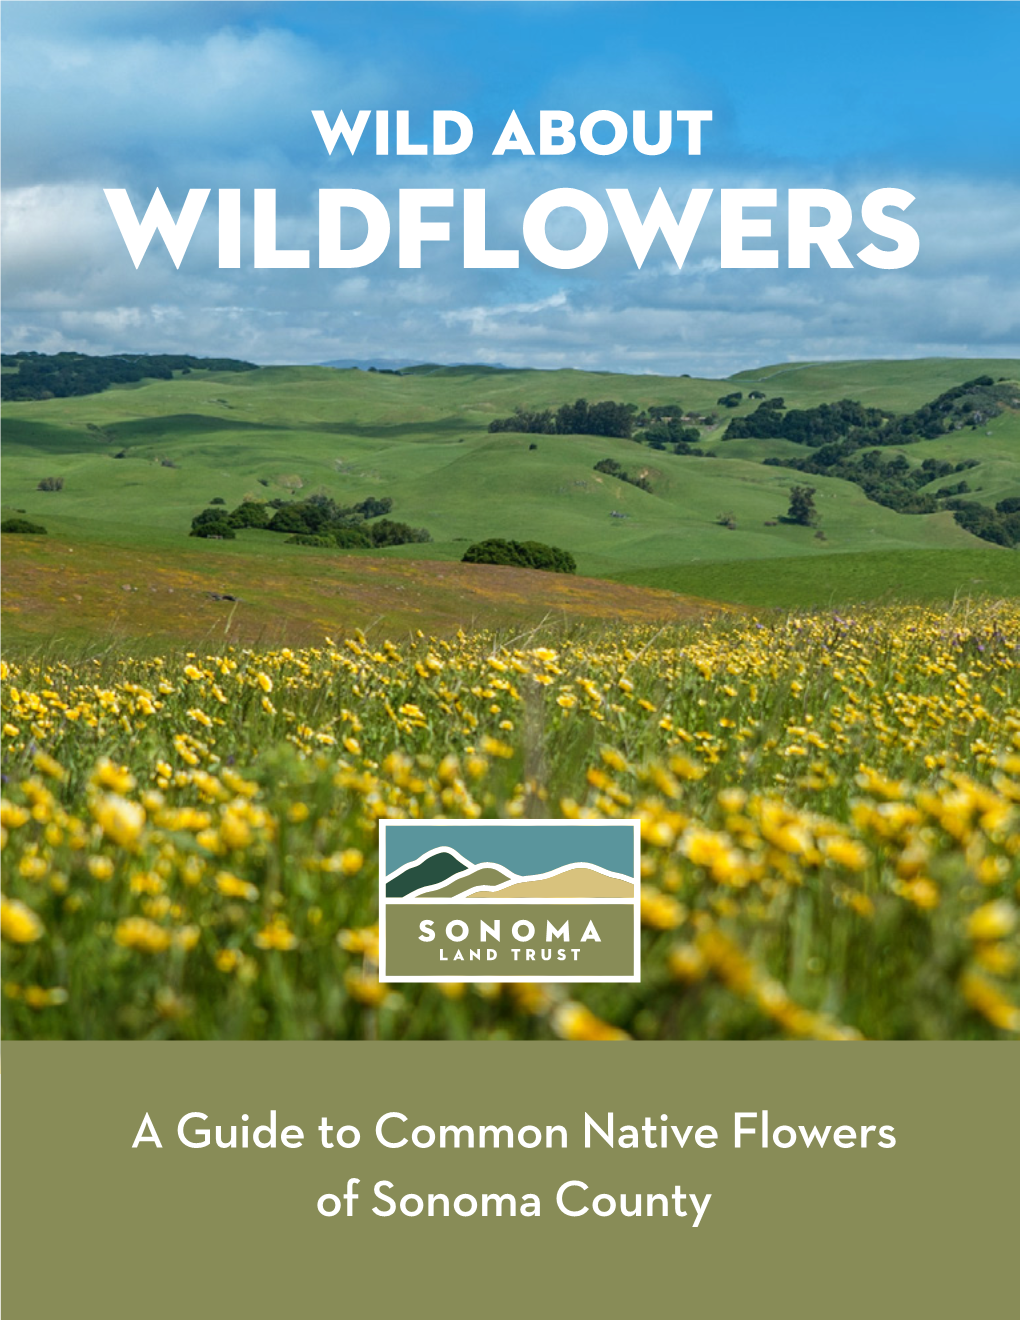 A Guide to Common Native Flowers of Sonoma County